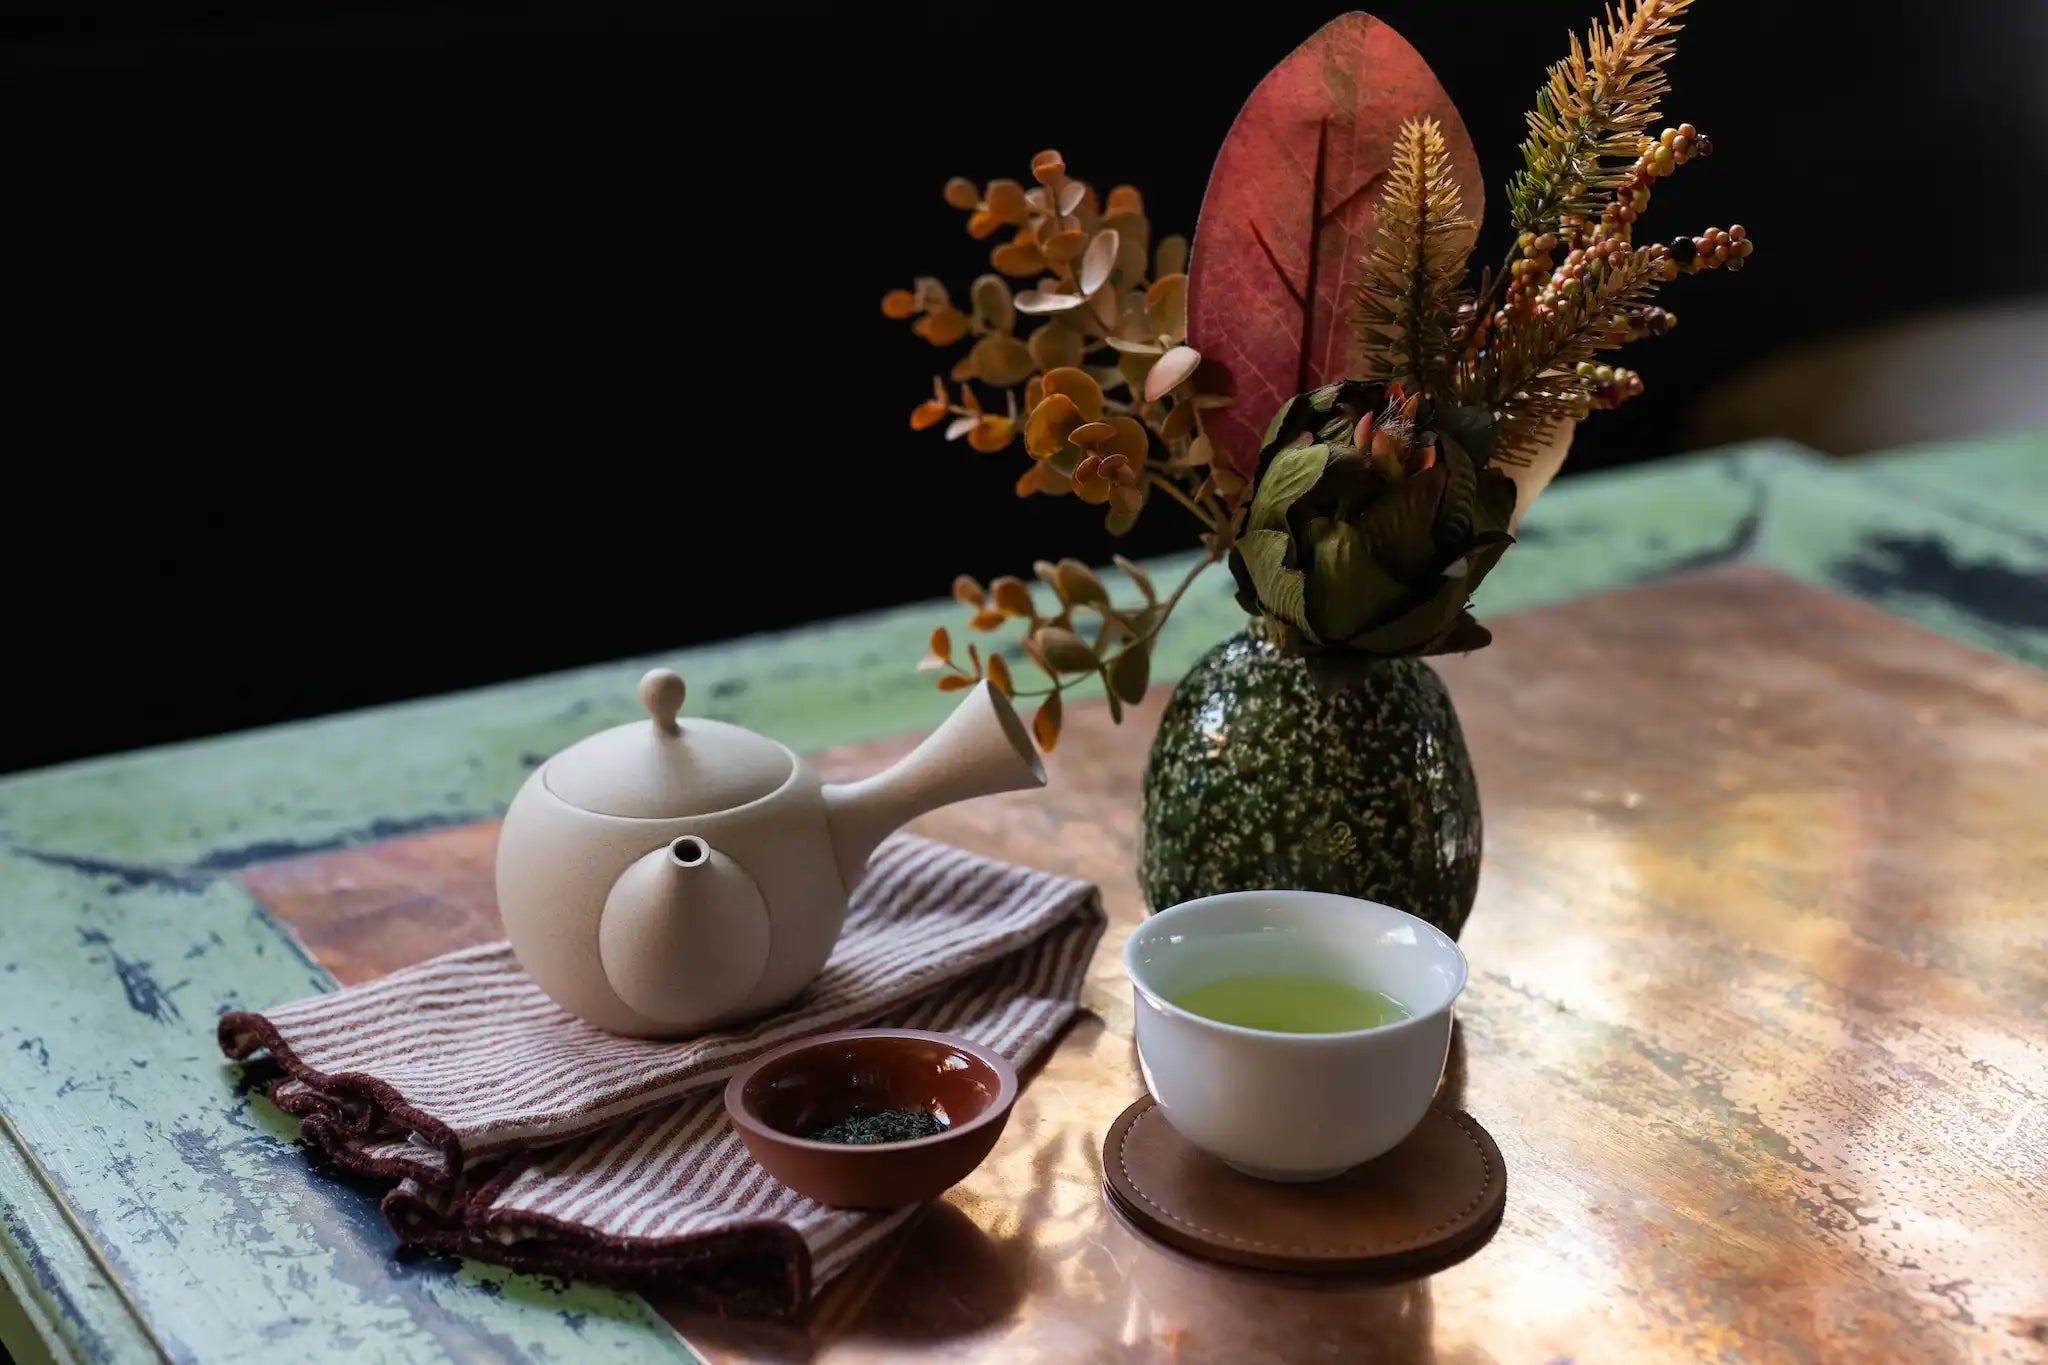 sencha green tea brewed in a kyusu Japanese tea pot and served in a white cup next to a vase with autumn protea